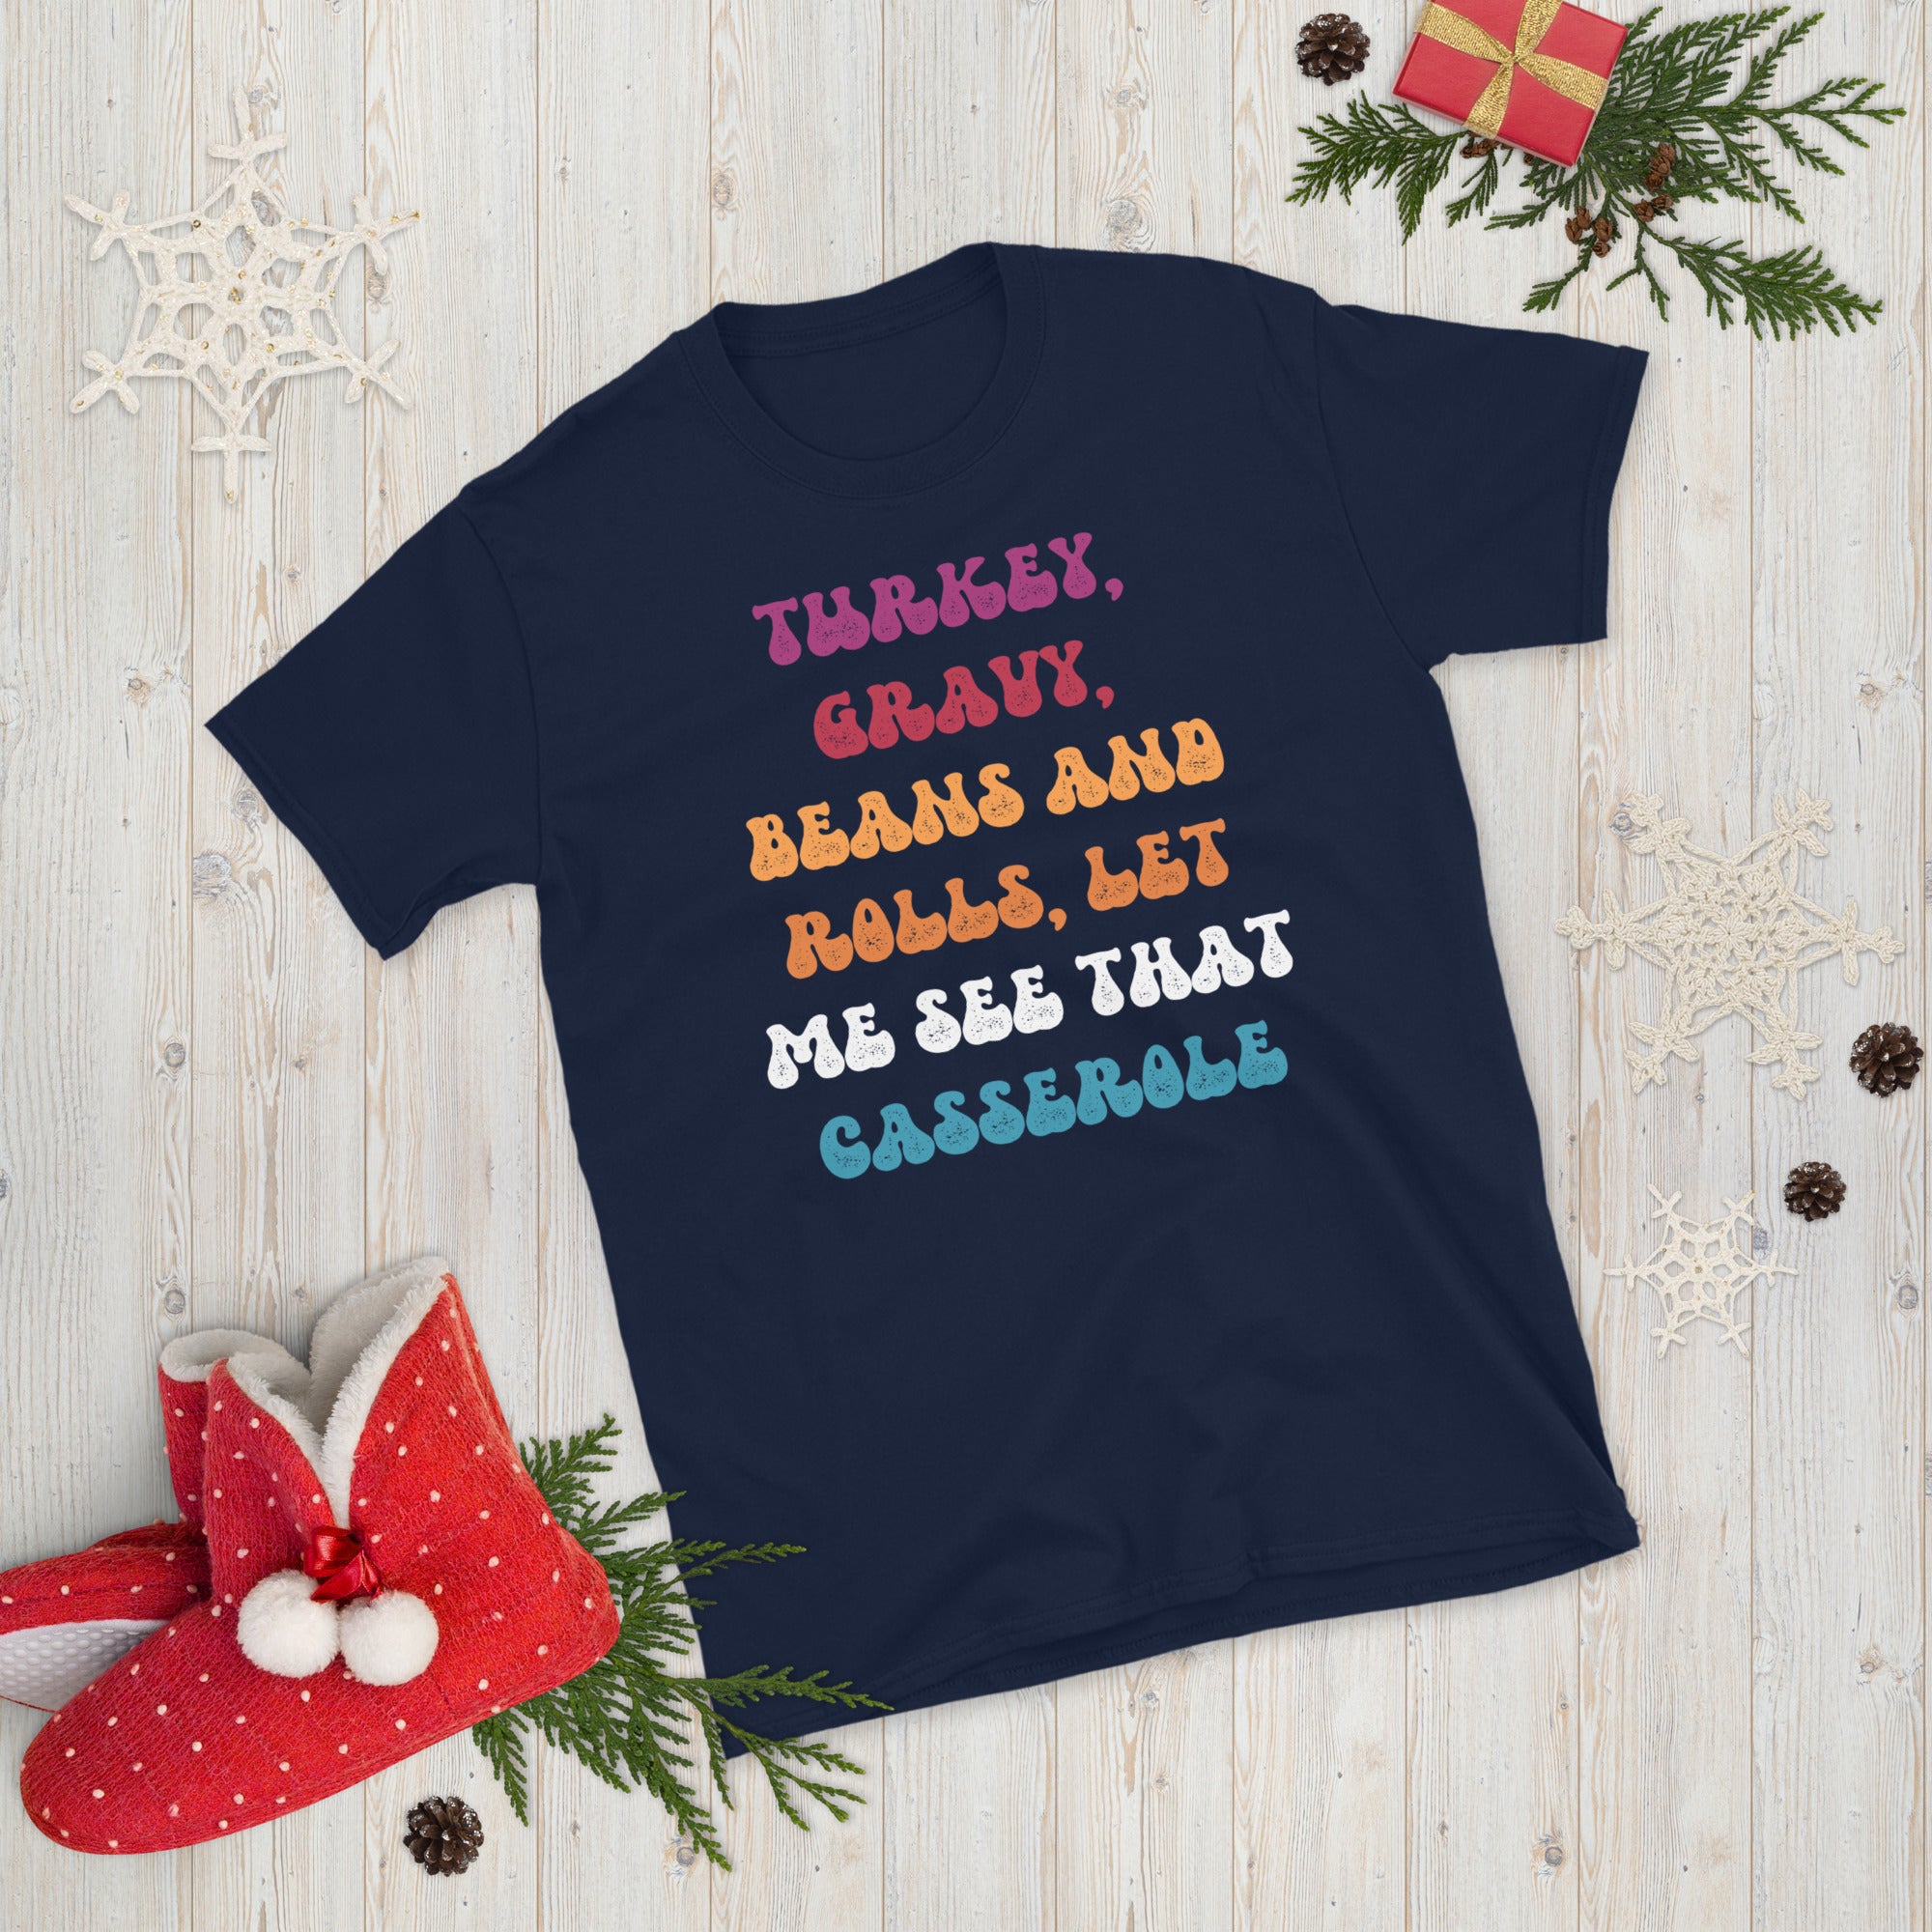 Turkey Gravy Beans And Rolls Let Me See That Casserole Shirt, Thanksgiving Funny Shirt, Turkey Lover TShirt, Family Thanksgiving Gifts - Madeinsea©